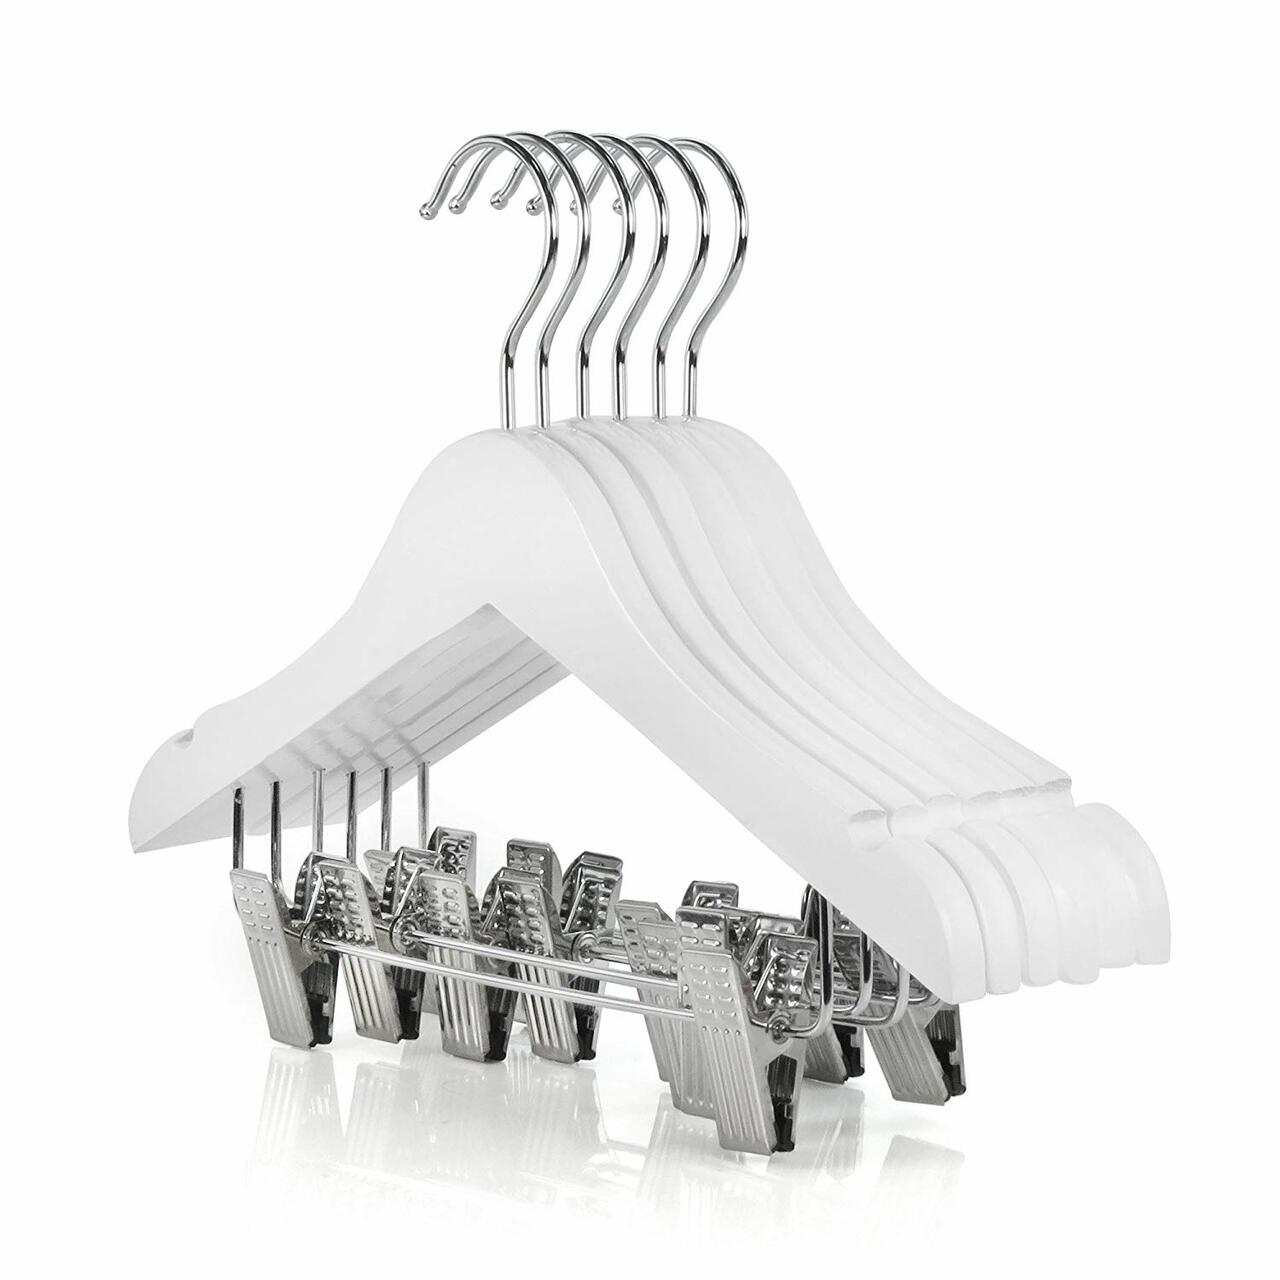 36cm White Wooden Baby Hangers with Clips & Notches Sold in Bundles of 25/50/100 - Rackshop Australia